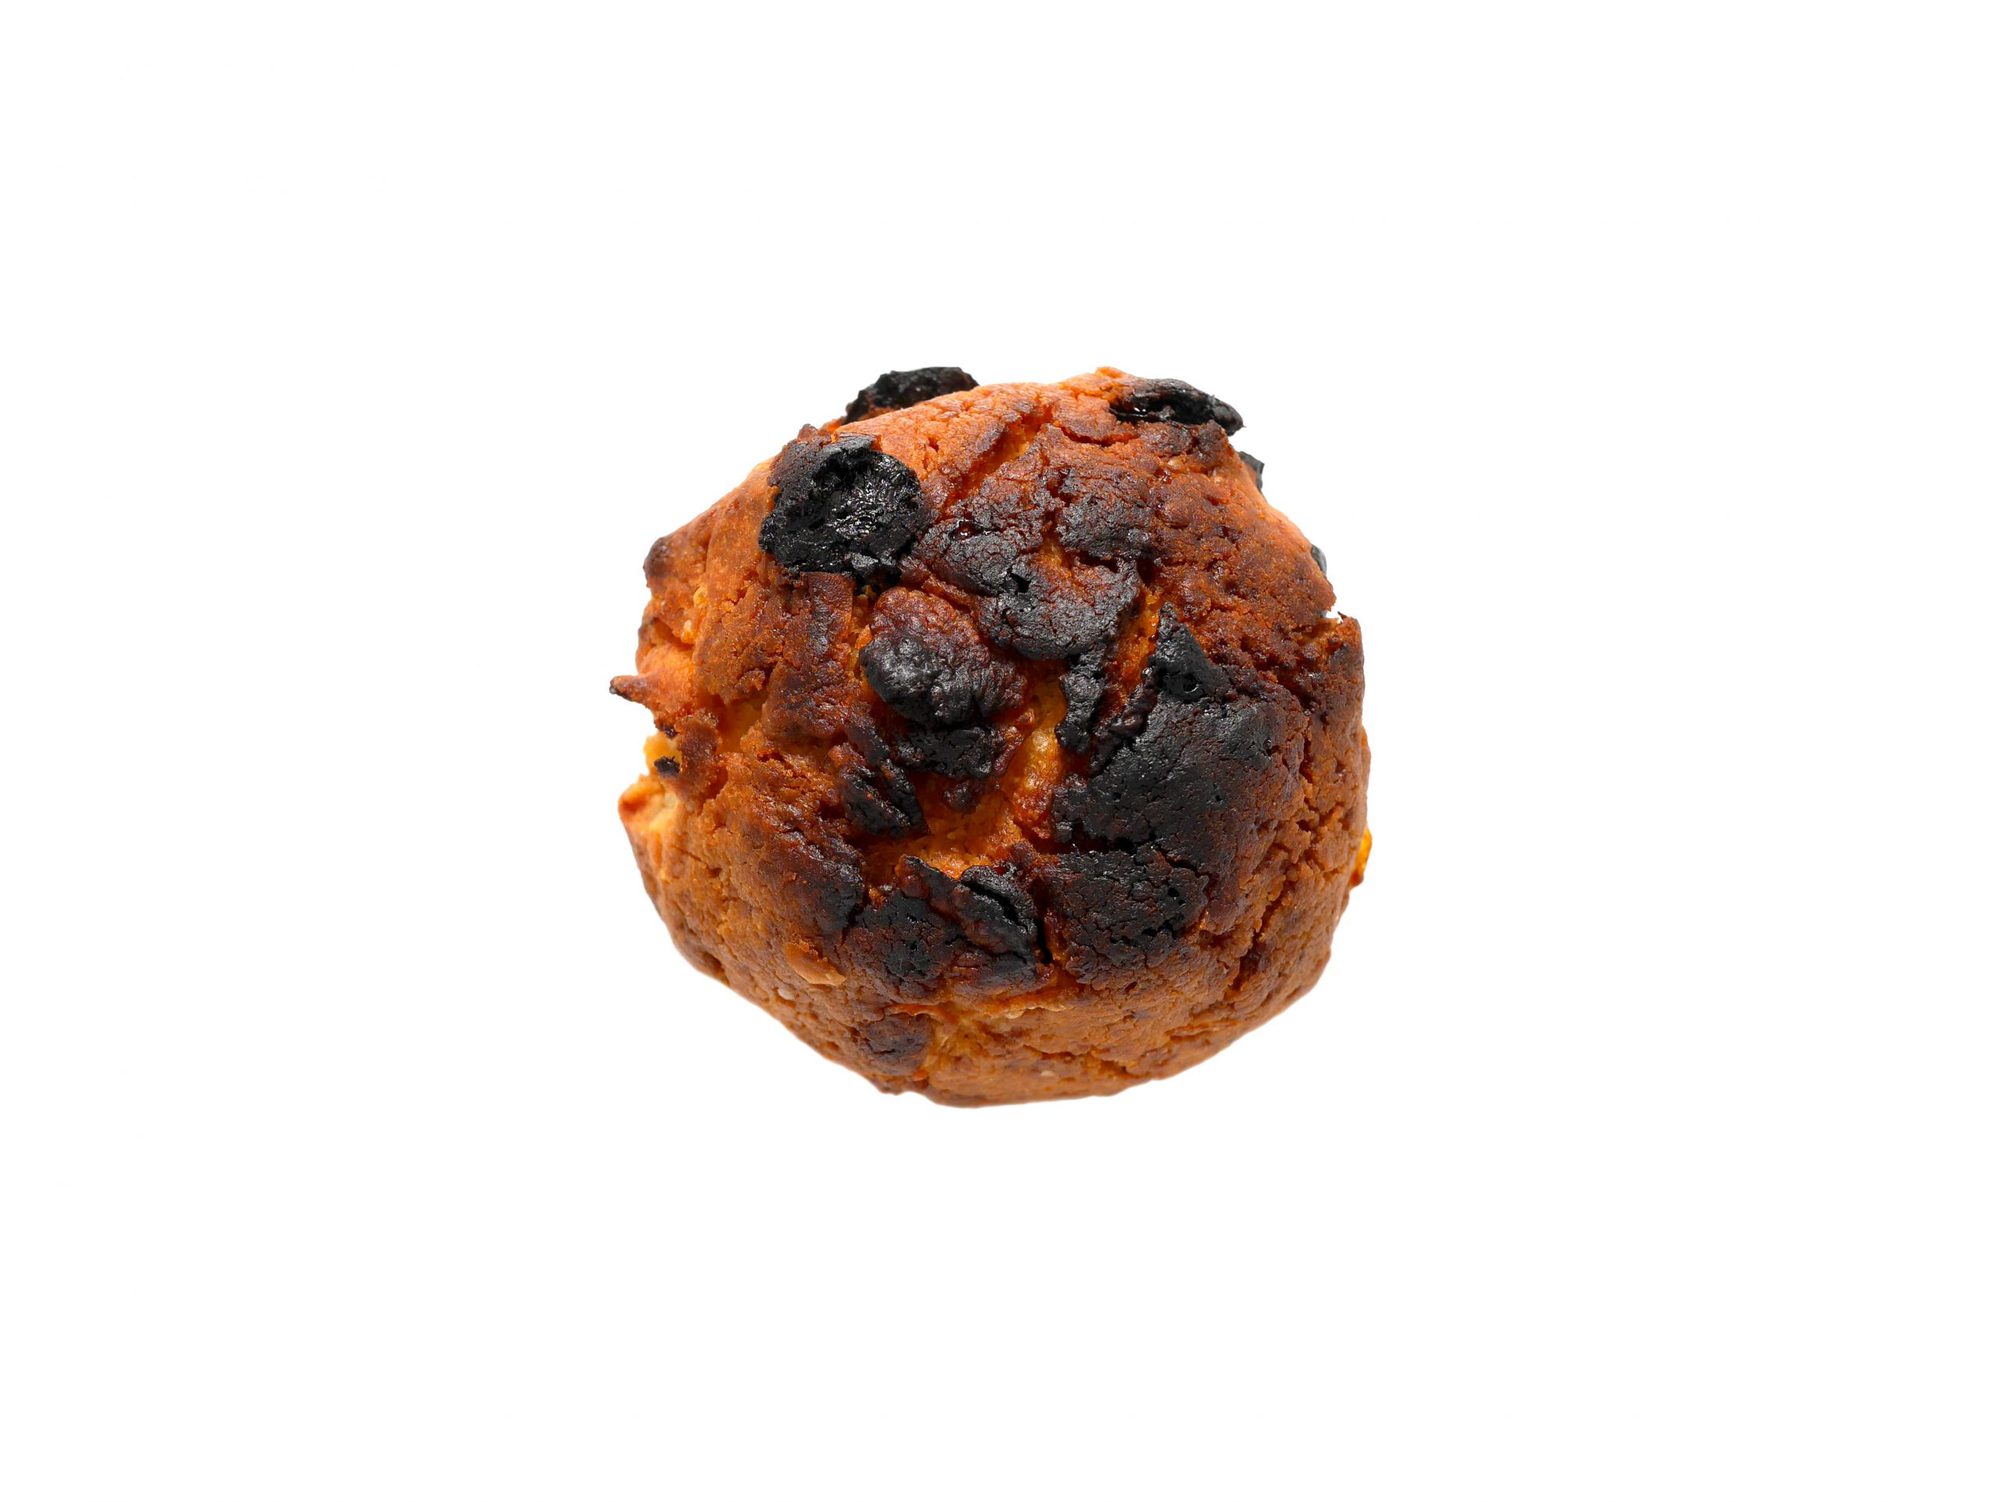 Burned,Cornflake,And,Raisin,Cookie,Isolated,On,White,Background.,Top